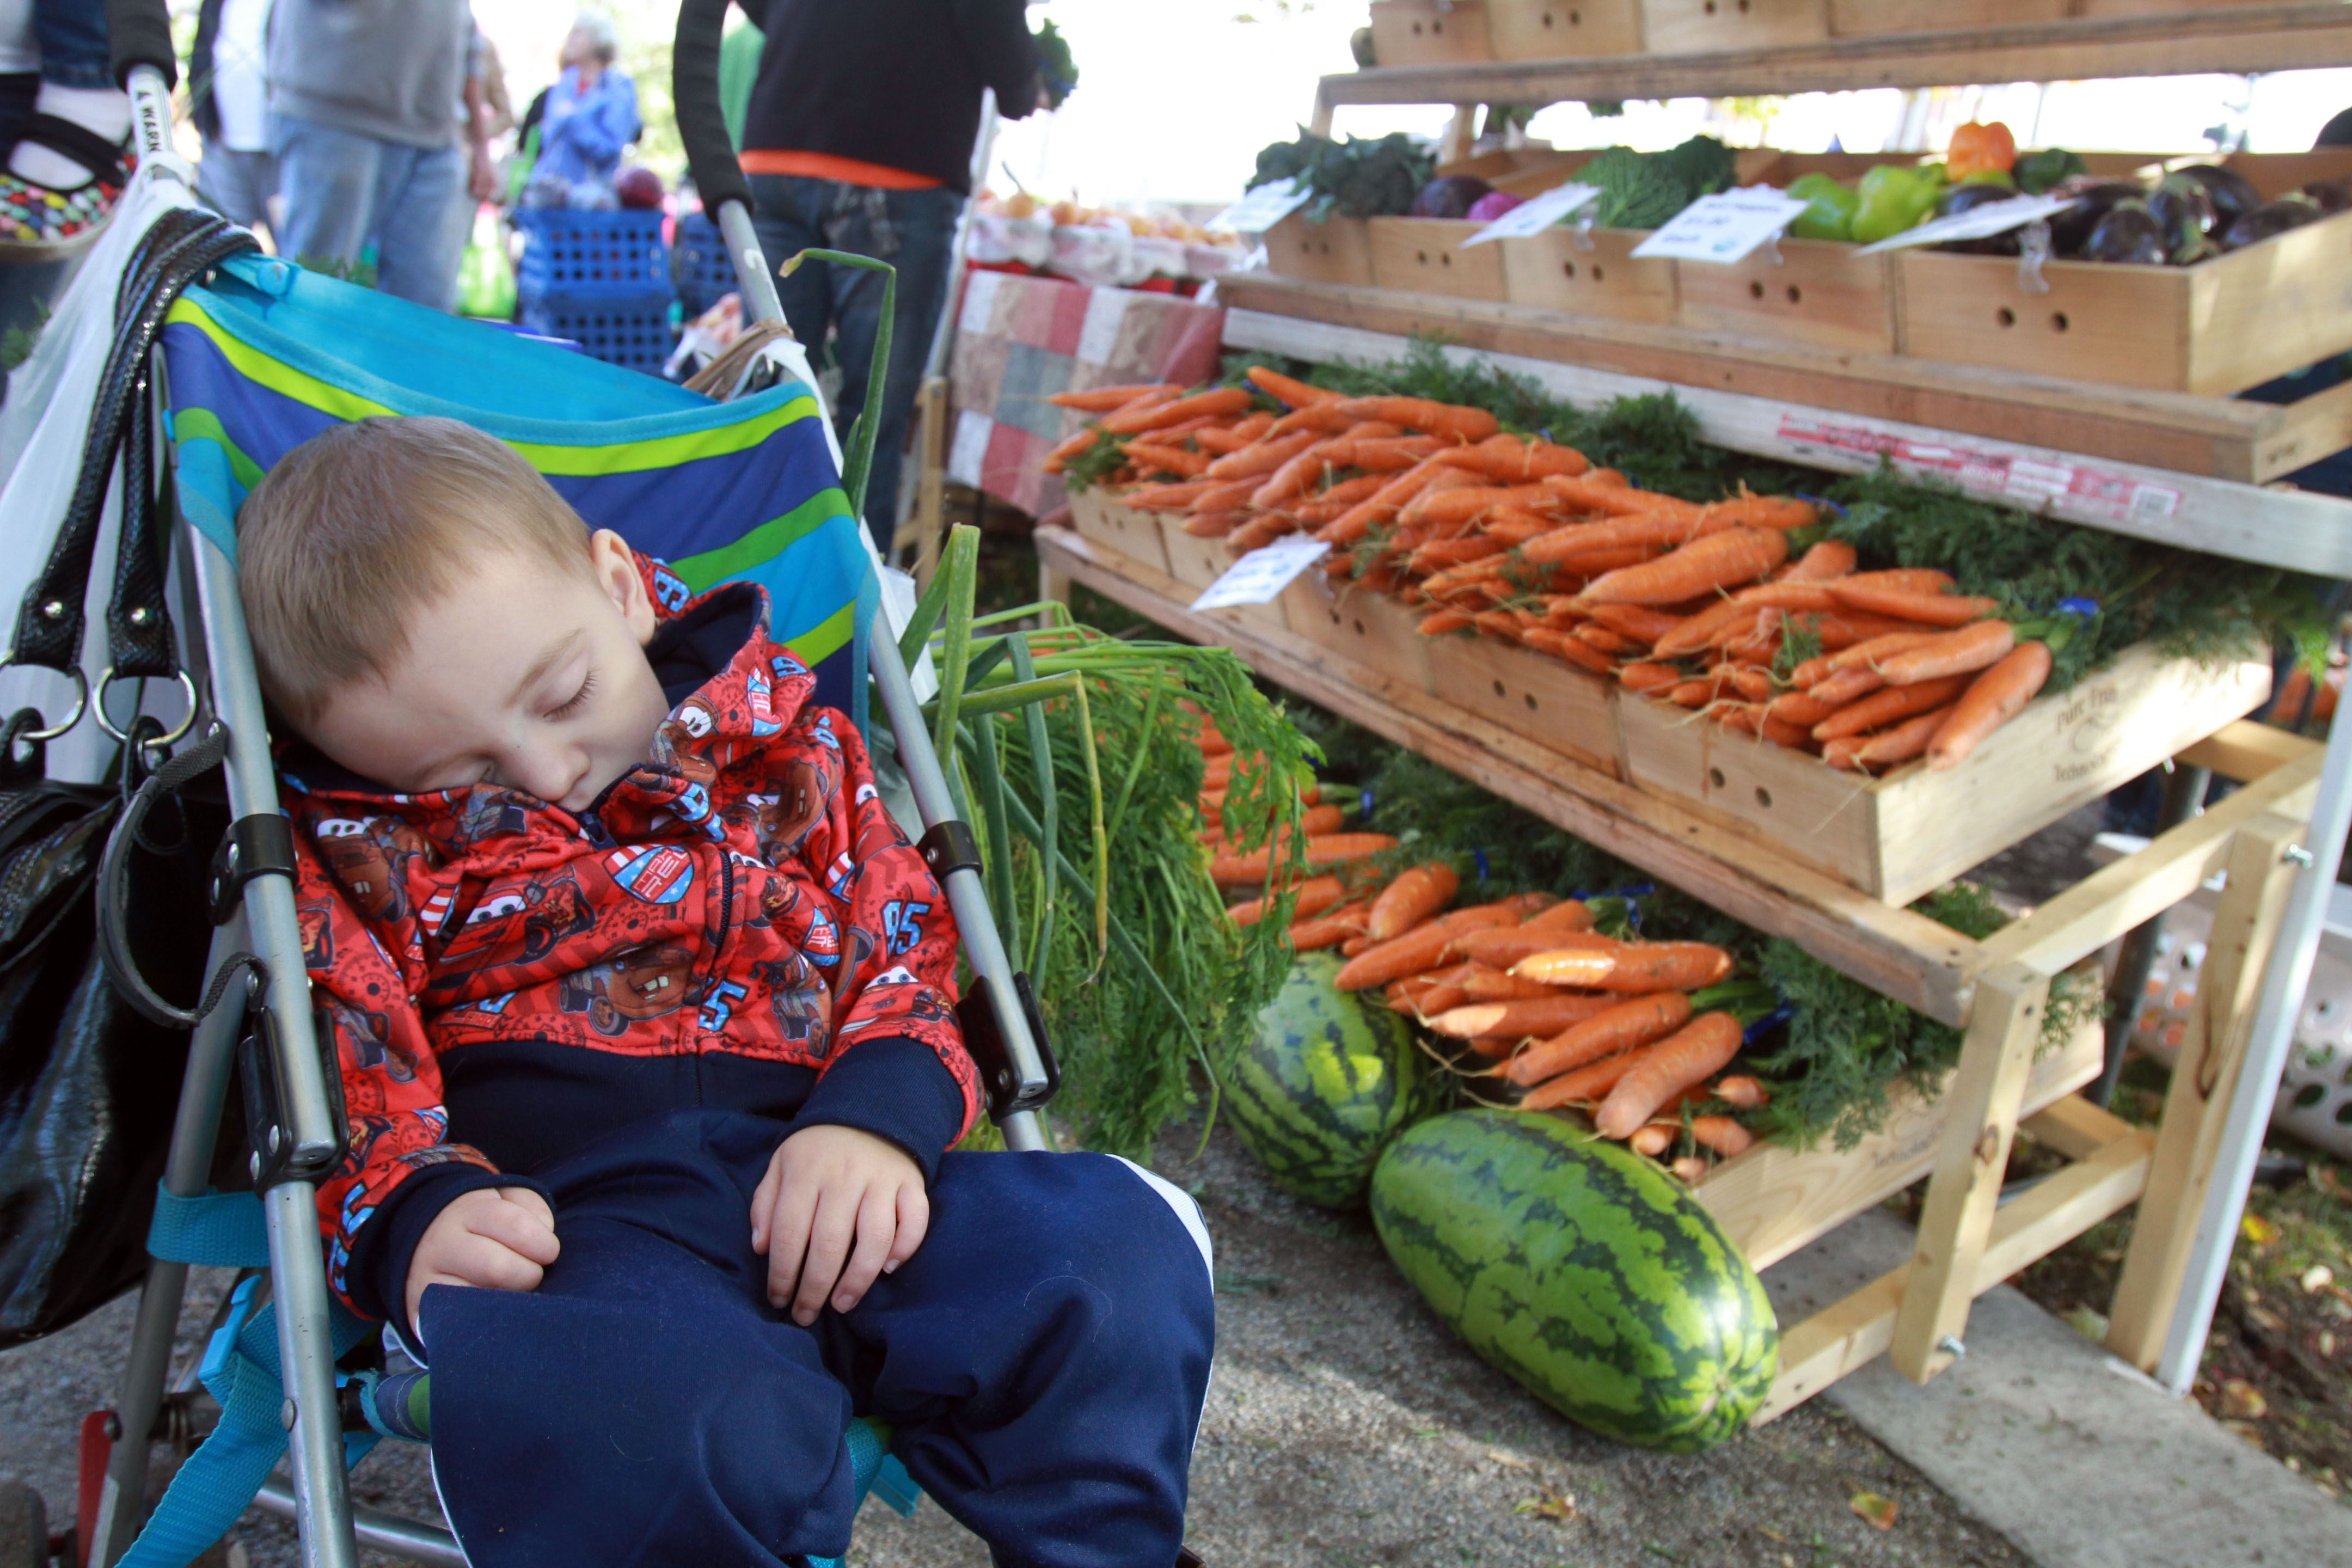 (Keith Johnson | The Salt Lake Tribune)
Mason Belliston naps at the Downtown Farmers Market in 2013. The popular showcase of produce and products is anything but a snoozer for the thousands who attend each Saturday.